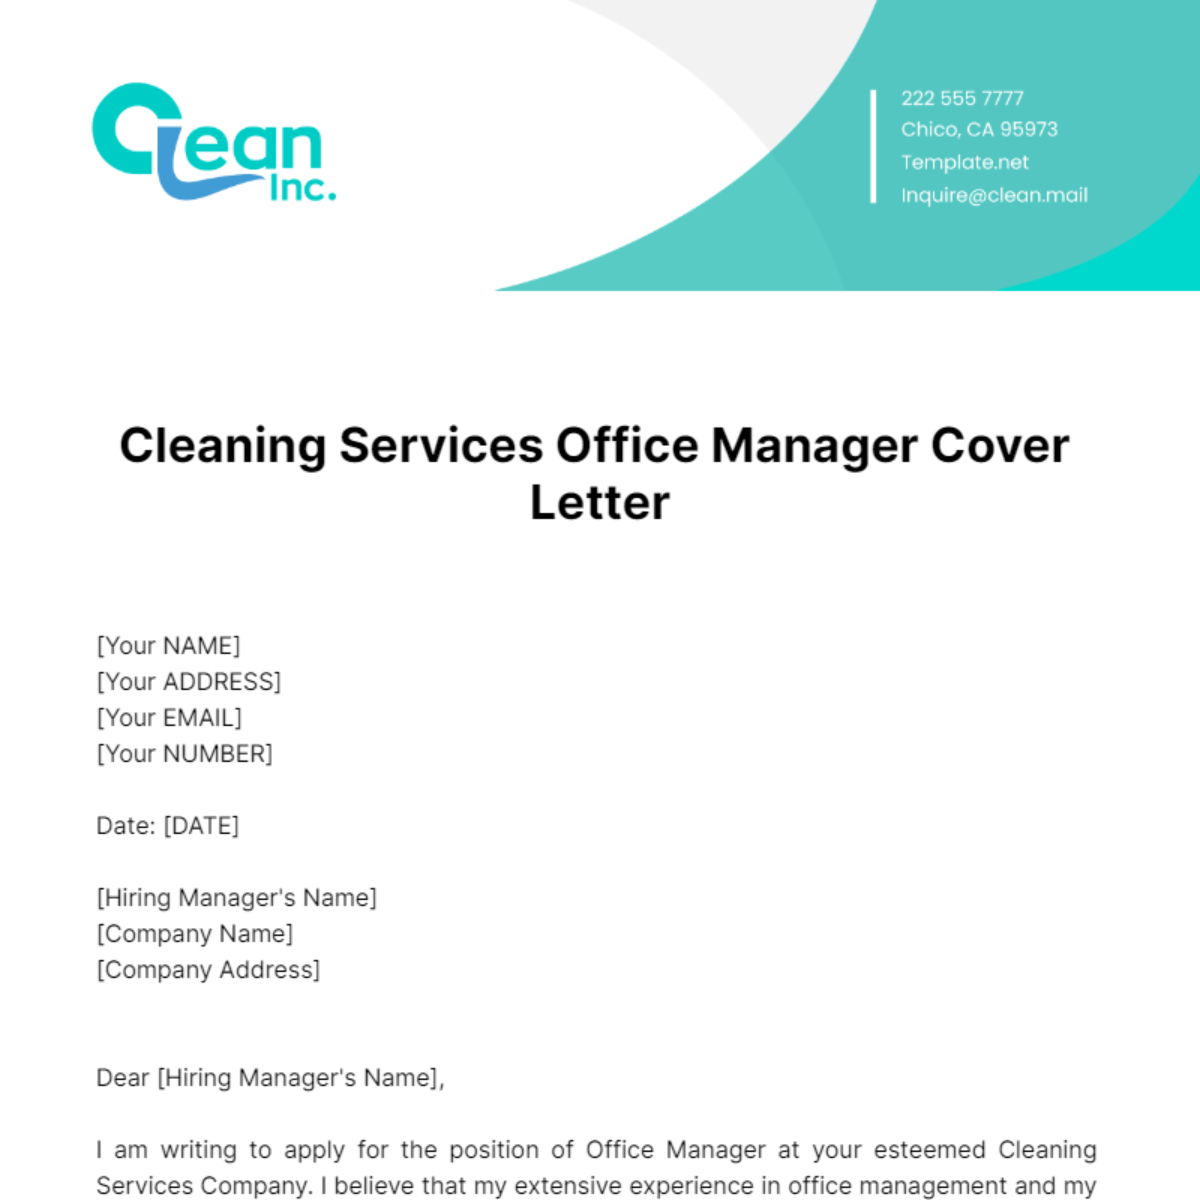 Cleaning Services Office Manager Cover Letter Template